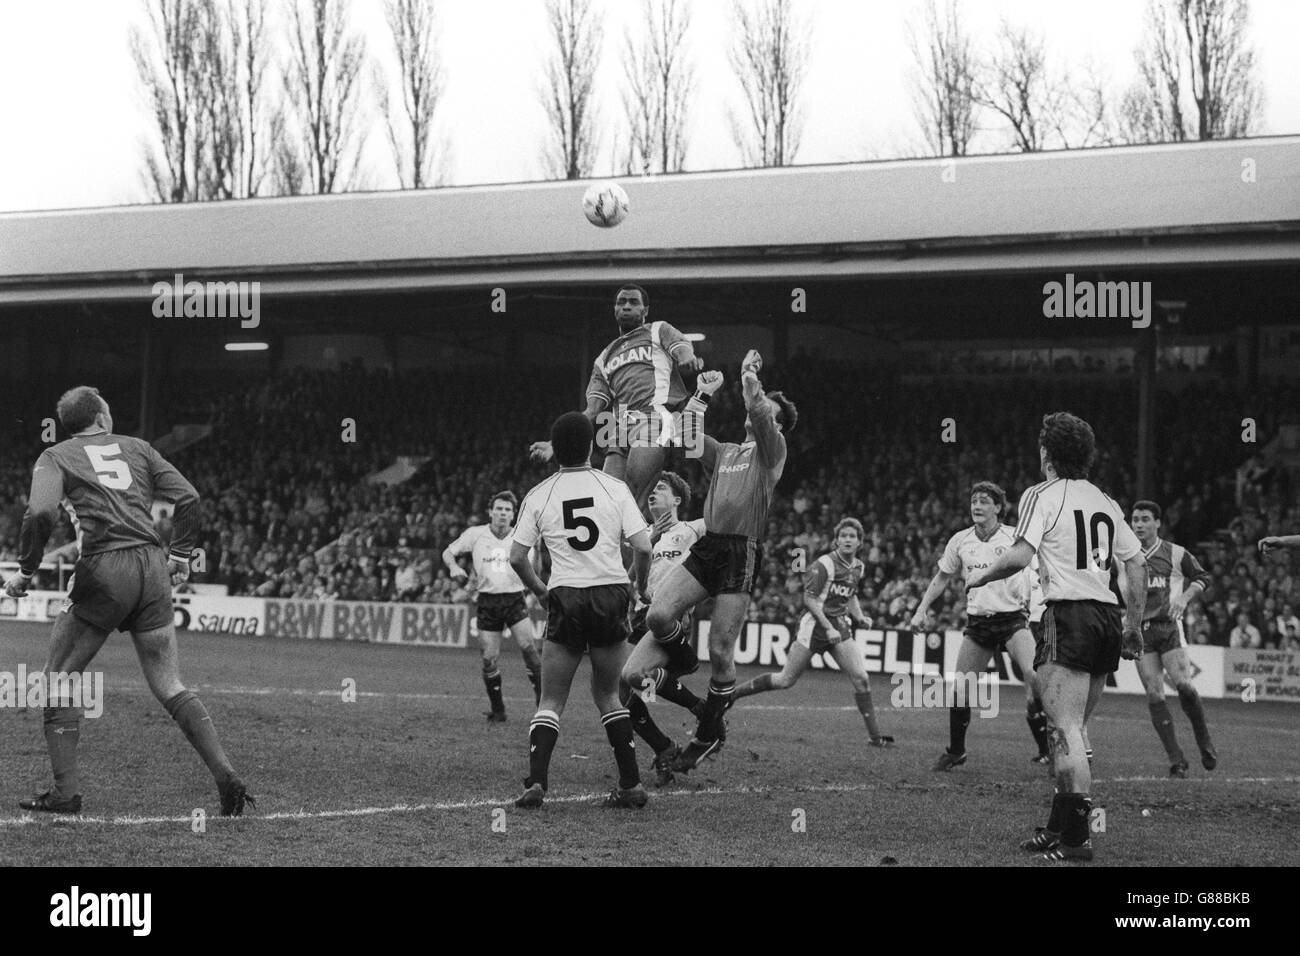 Bournemouth's Luther Blissett climbs above Manchester United goalkeeper Jim Leighton (r) and United No5, Paul McGrath, as the ball heads over the crossbar during the FA Cup Fifth Round match at Dean Court, Bournemouth. Stock Photo